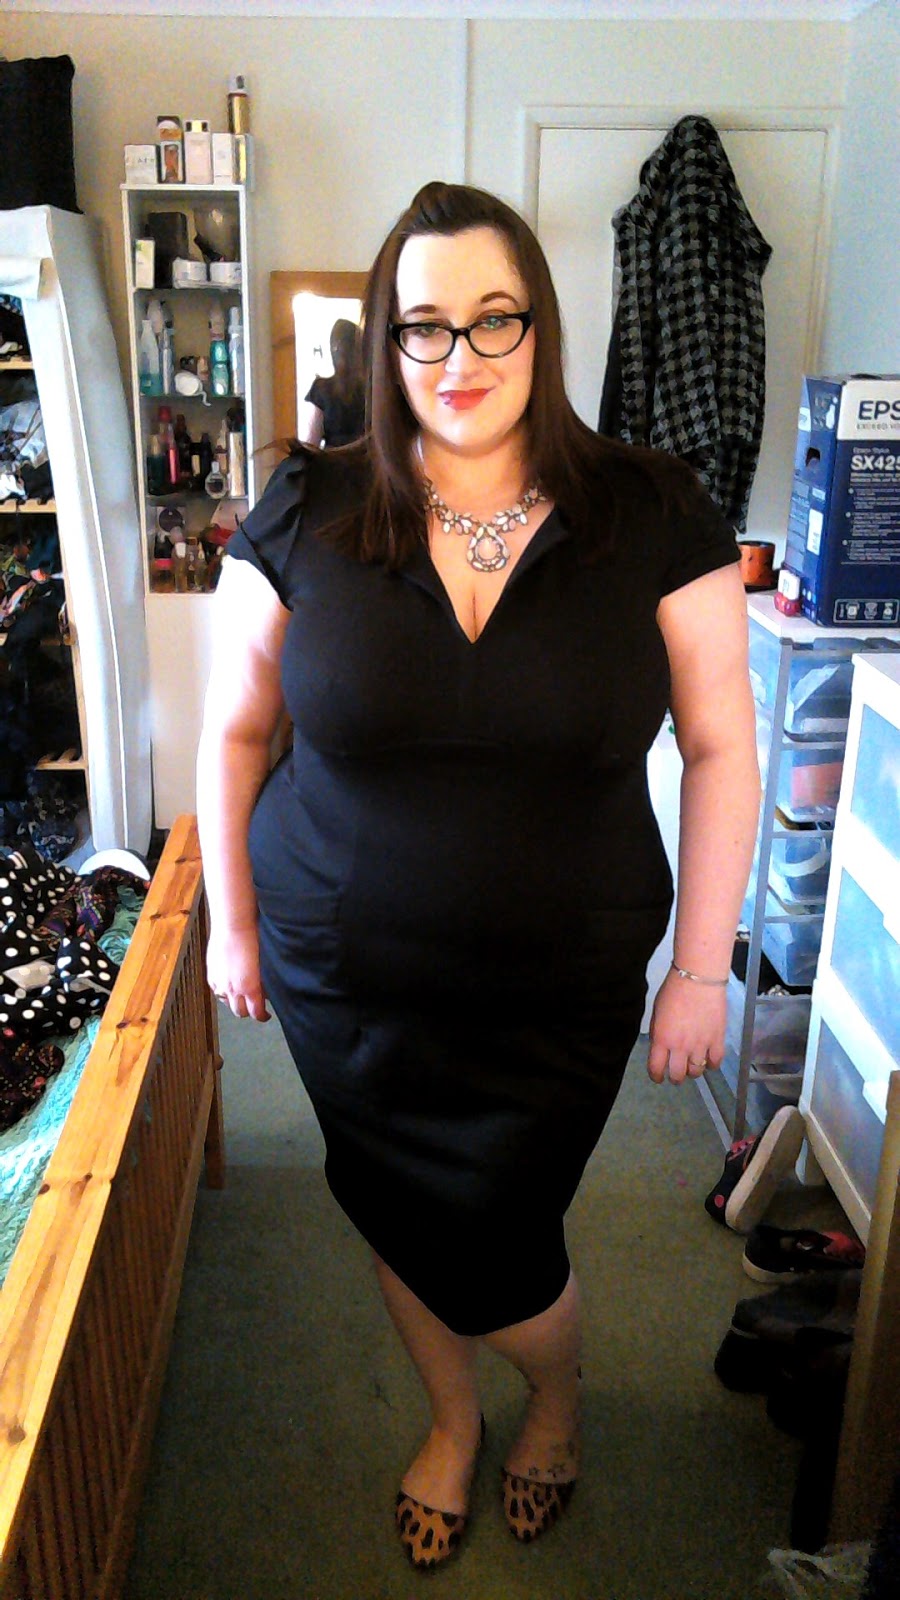 Secretary Chic - Does My Blog Make Me Look Fat?